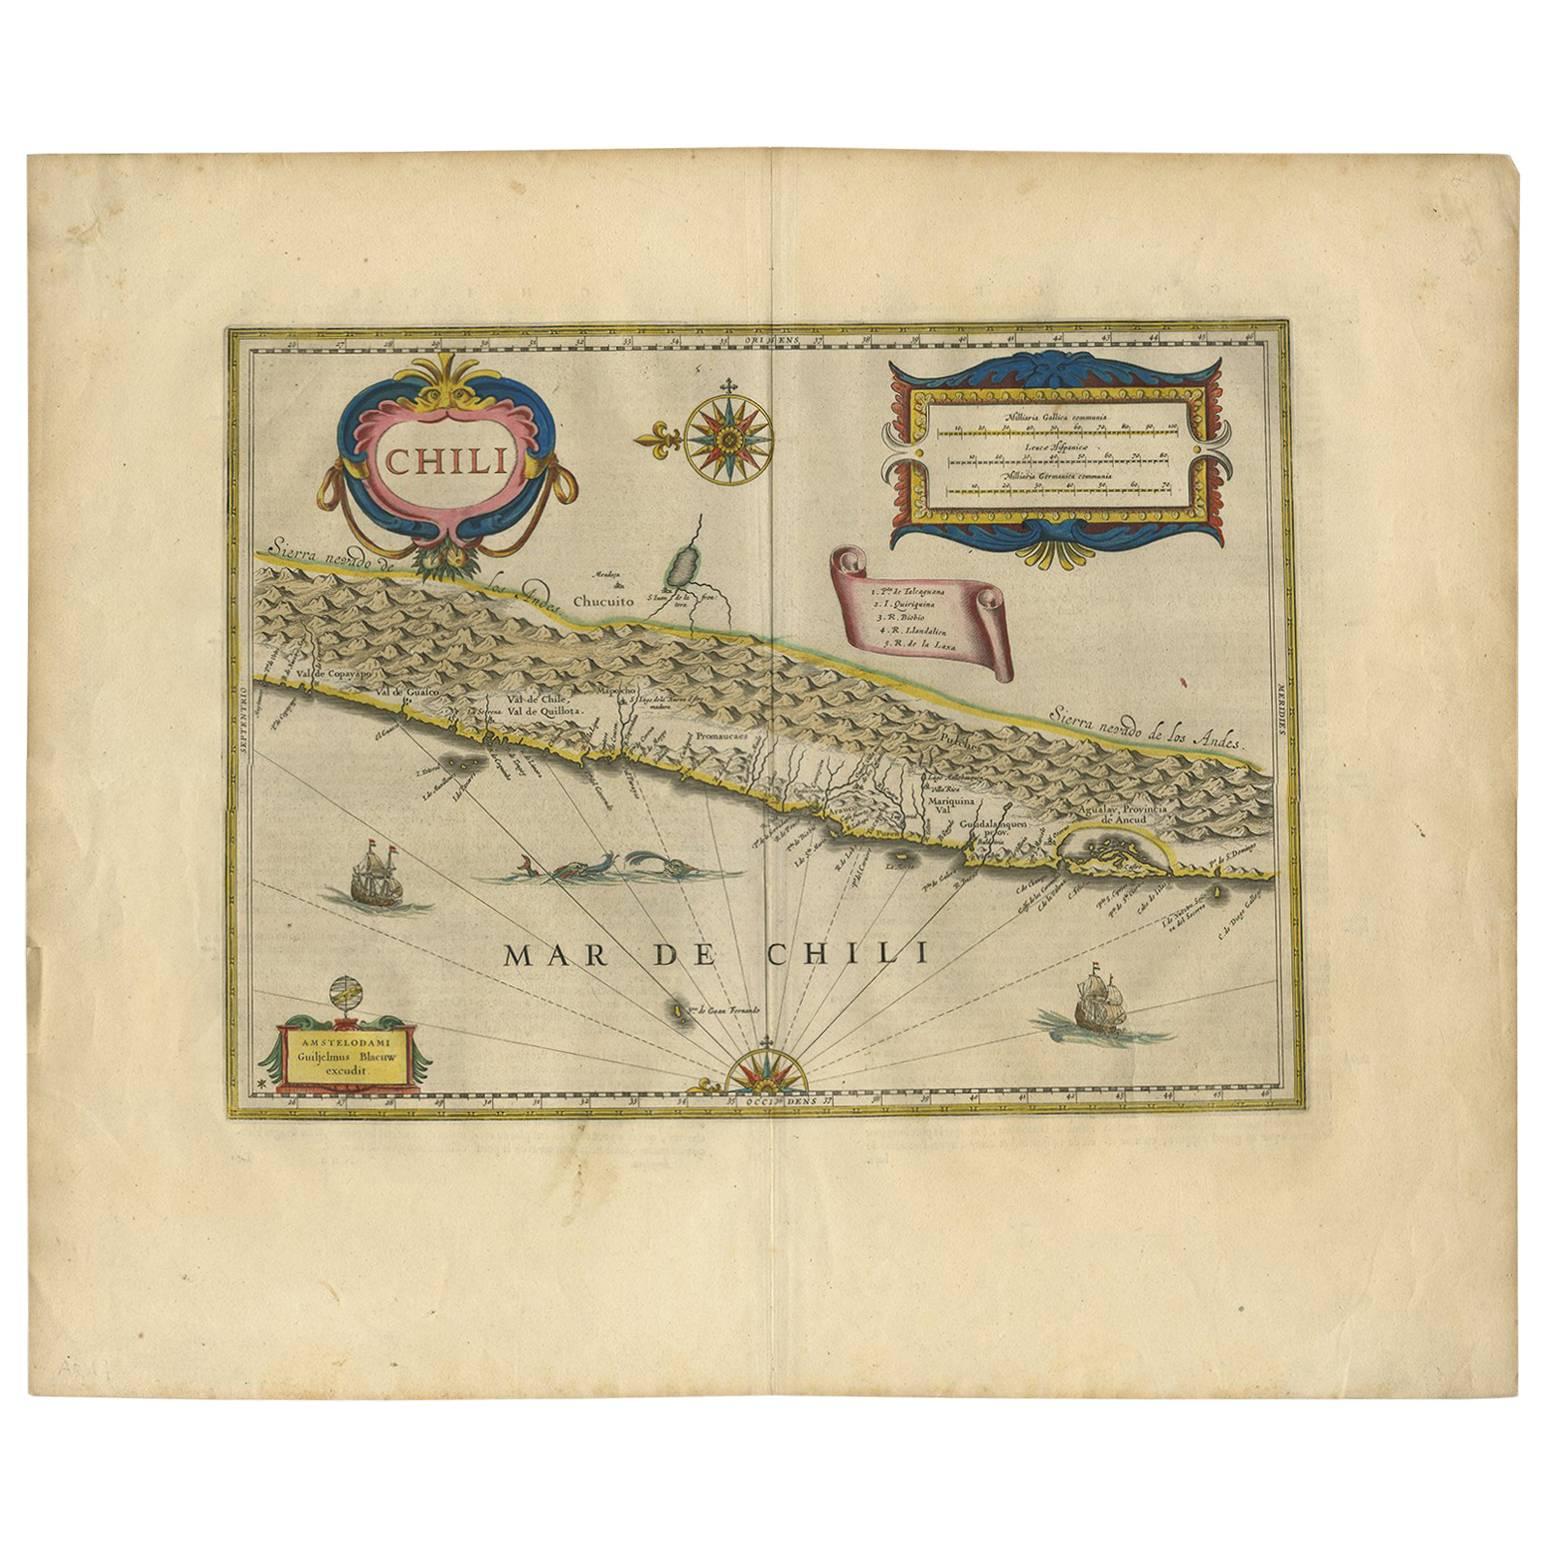 Orignal Hand-Colored Antique Map of Chili by W. Blaeu, 1658